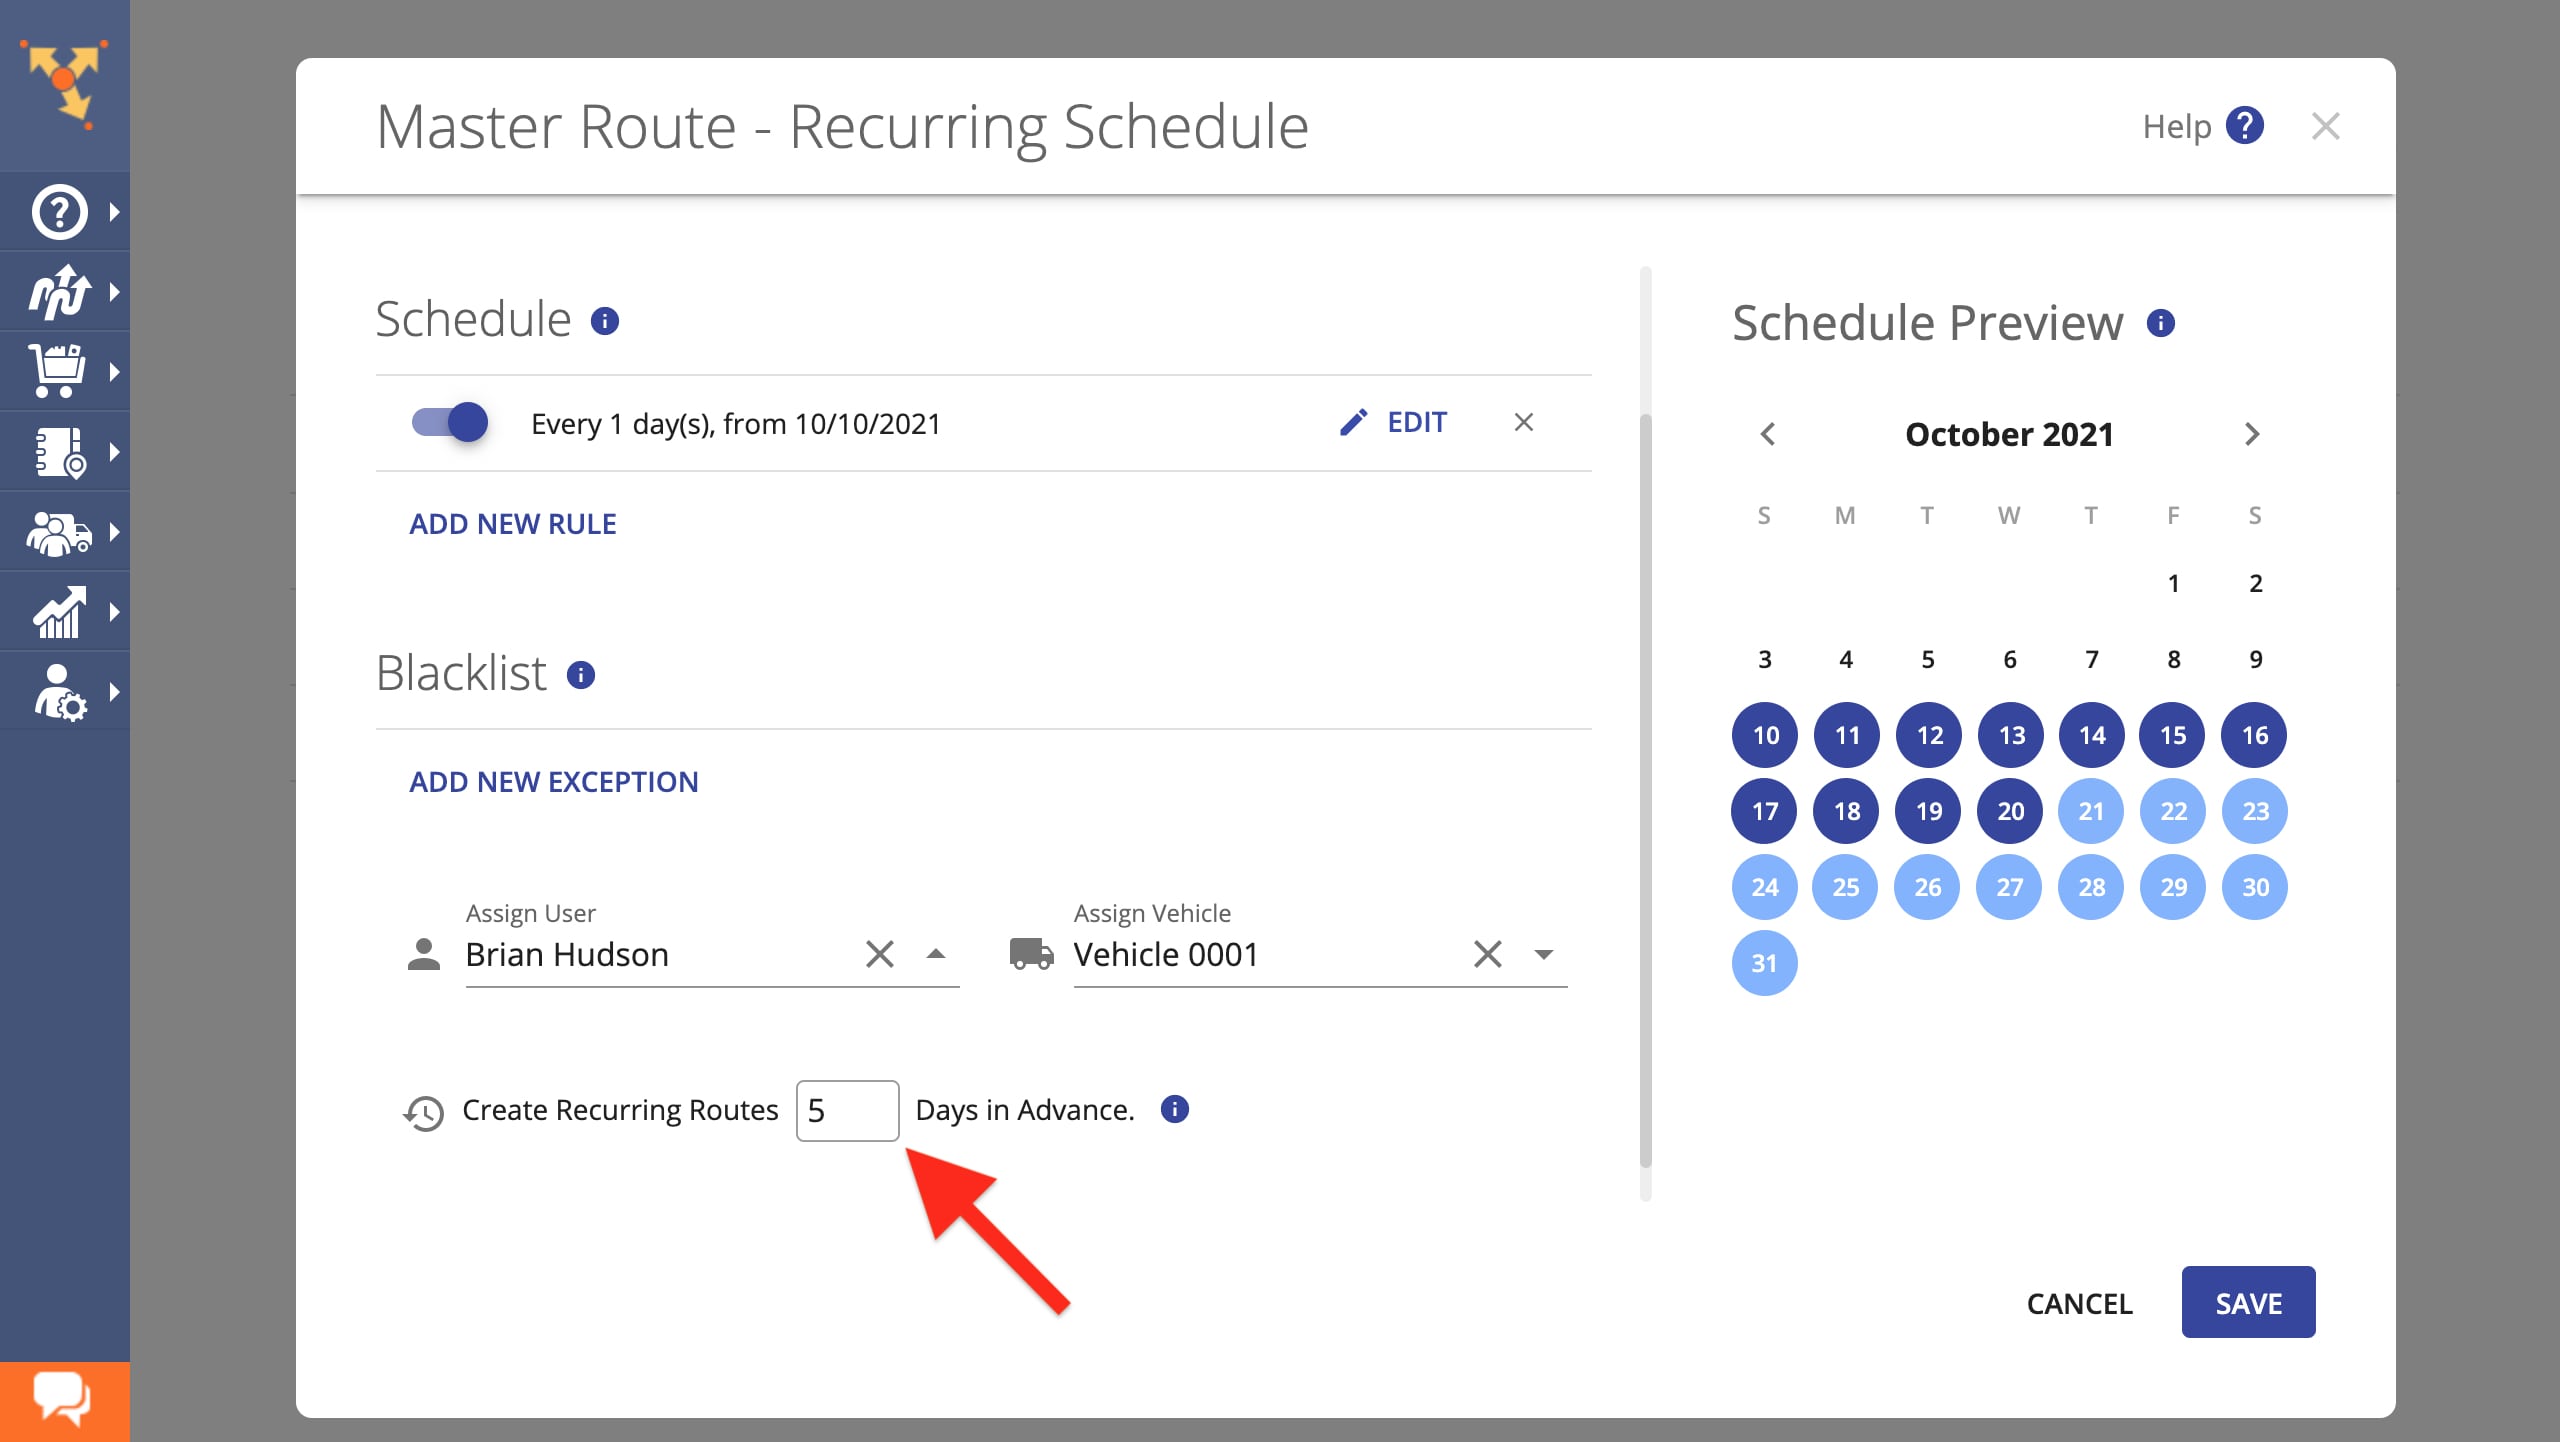 Scheduled routing - schedule future routes in advance with to estimate workload, auto assign drivers and vehicles, and more.